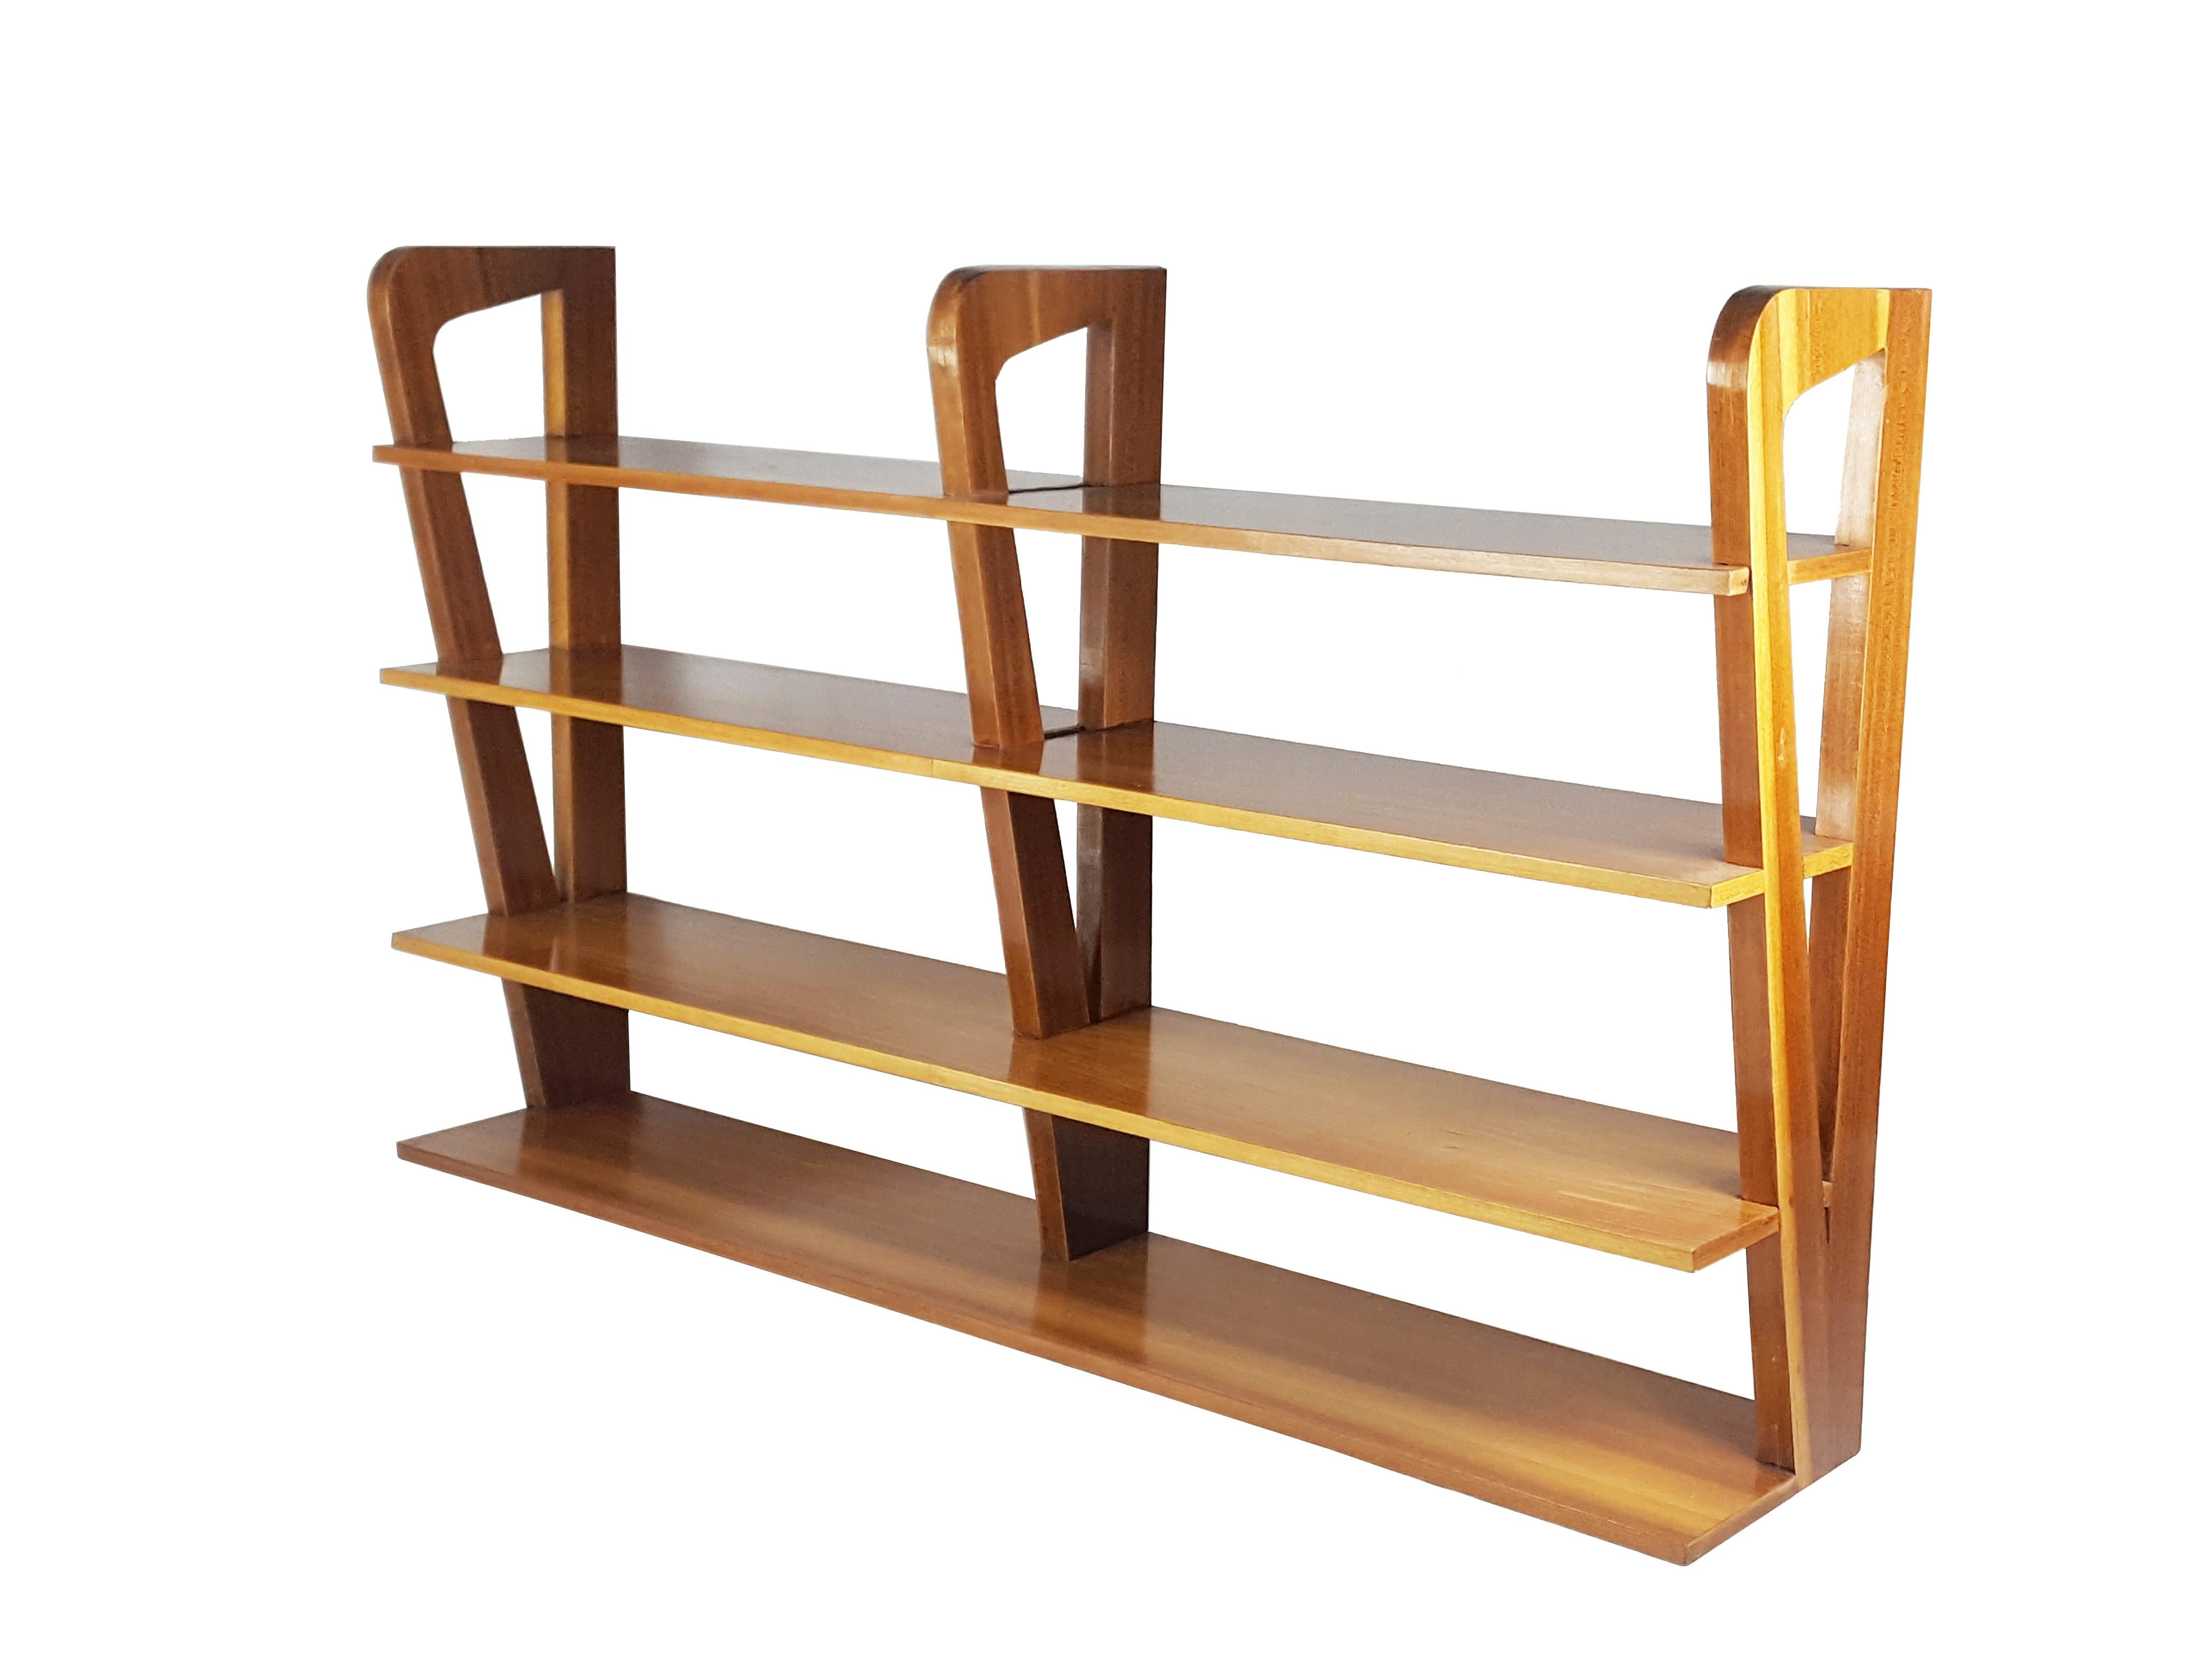 Teak and Brass Midcentury Free Standing Bookshelf Attributed to ISA For Sale 5